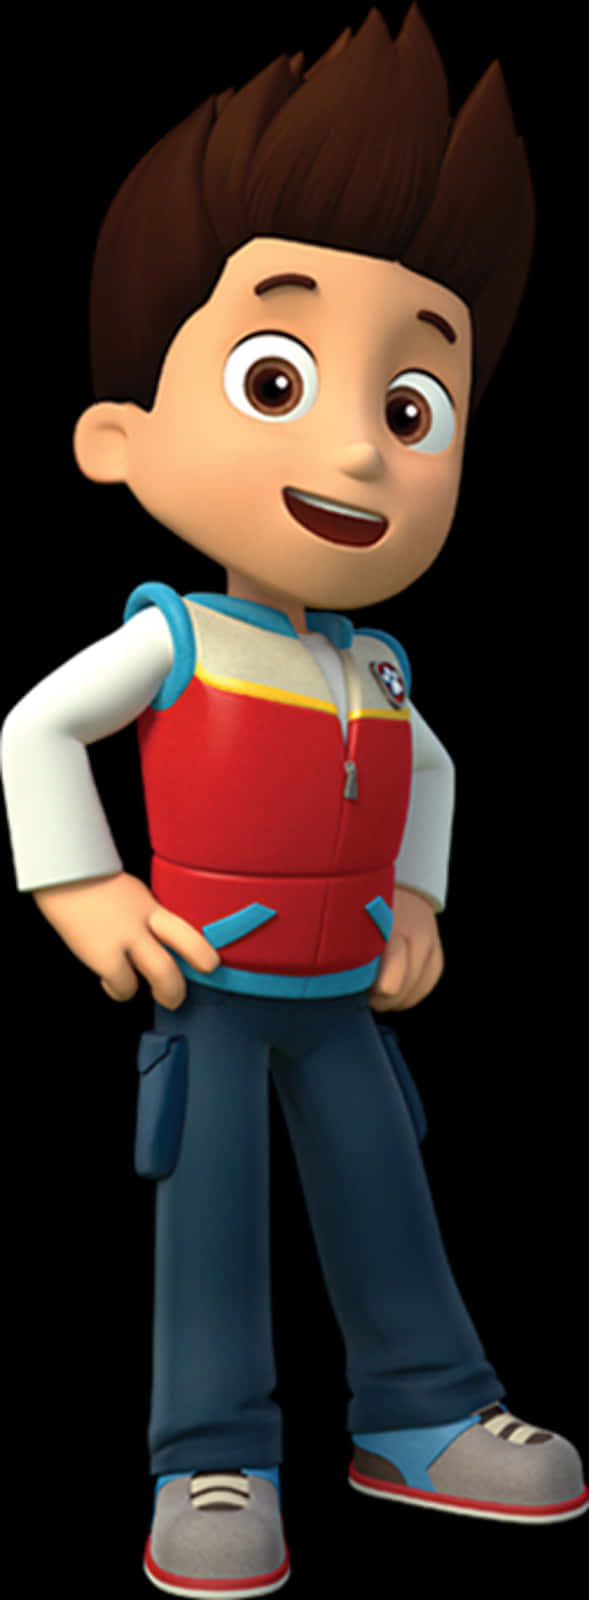 Ryder Paw Patrol Characters, HD Png Download is free transparent png image.  To explore more similar hd image …